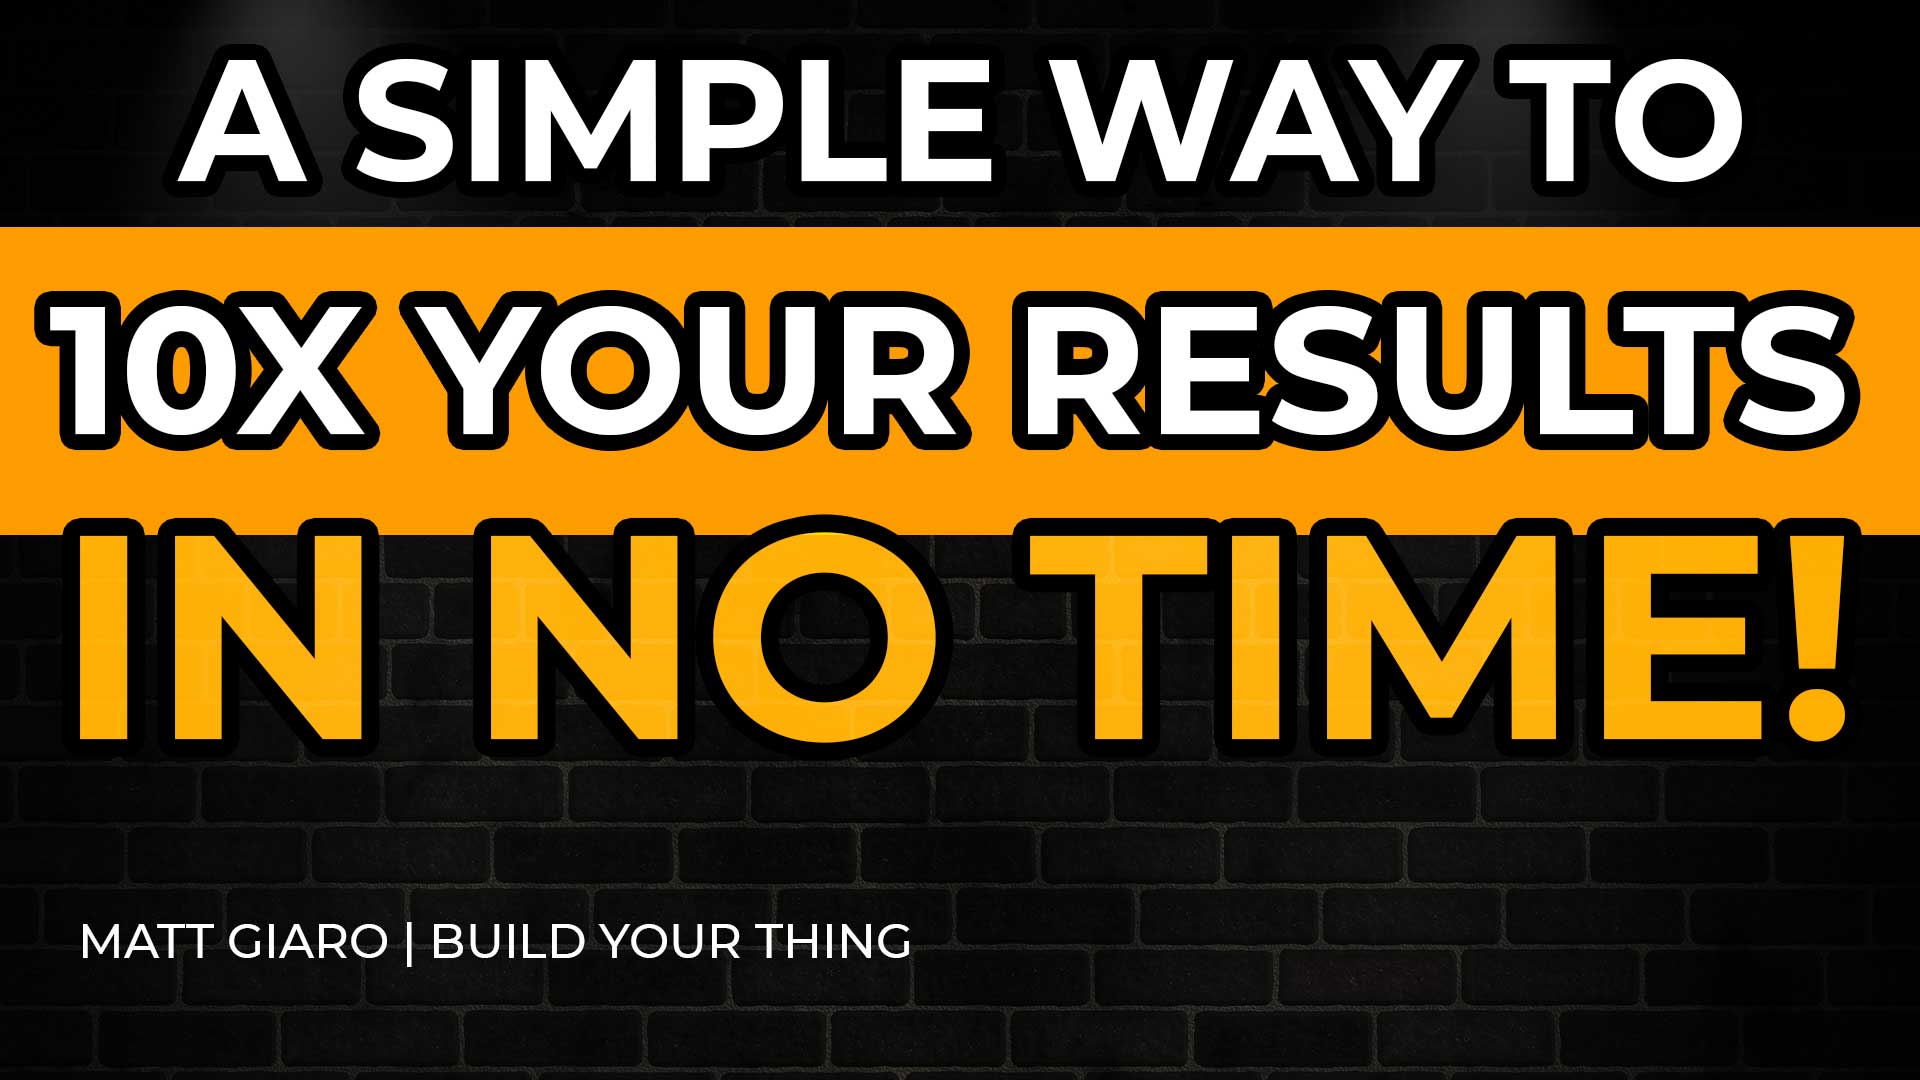 How to 10x Your Results in No Time